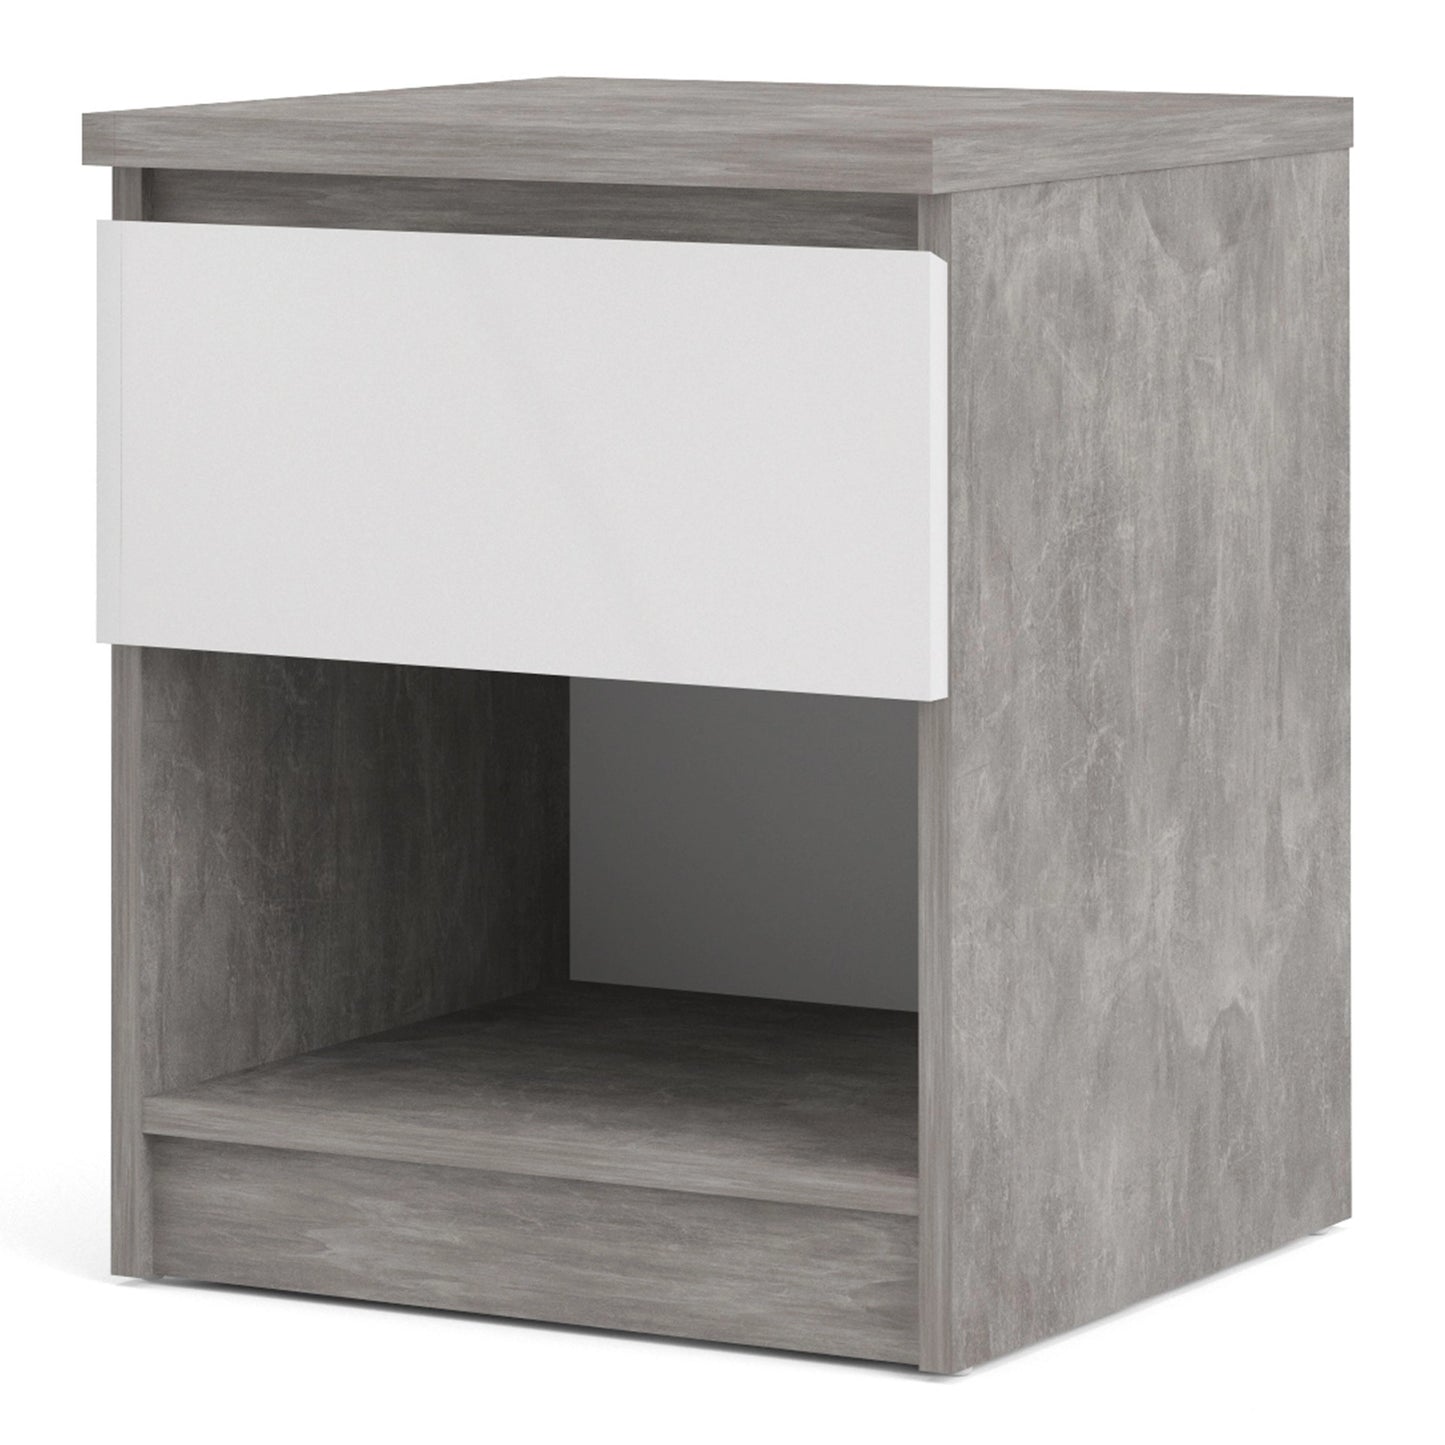 Furniture To Go Naia Bedside 1 Drawer 1 Shelf in Concrete & White High Gloss